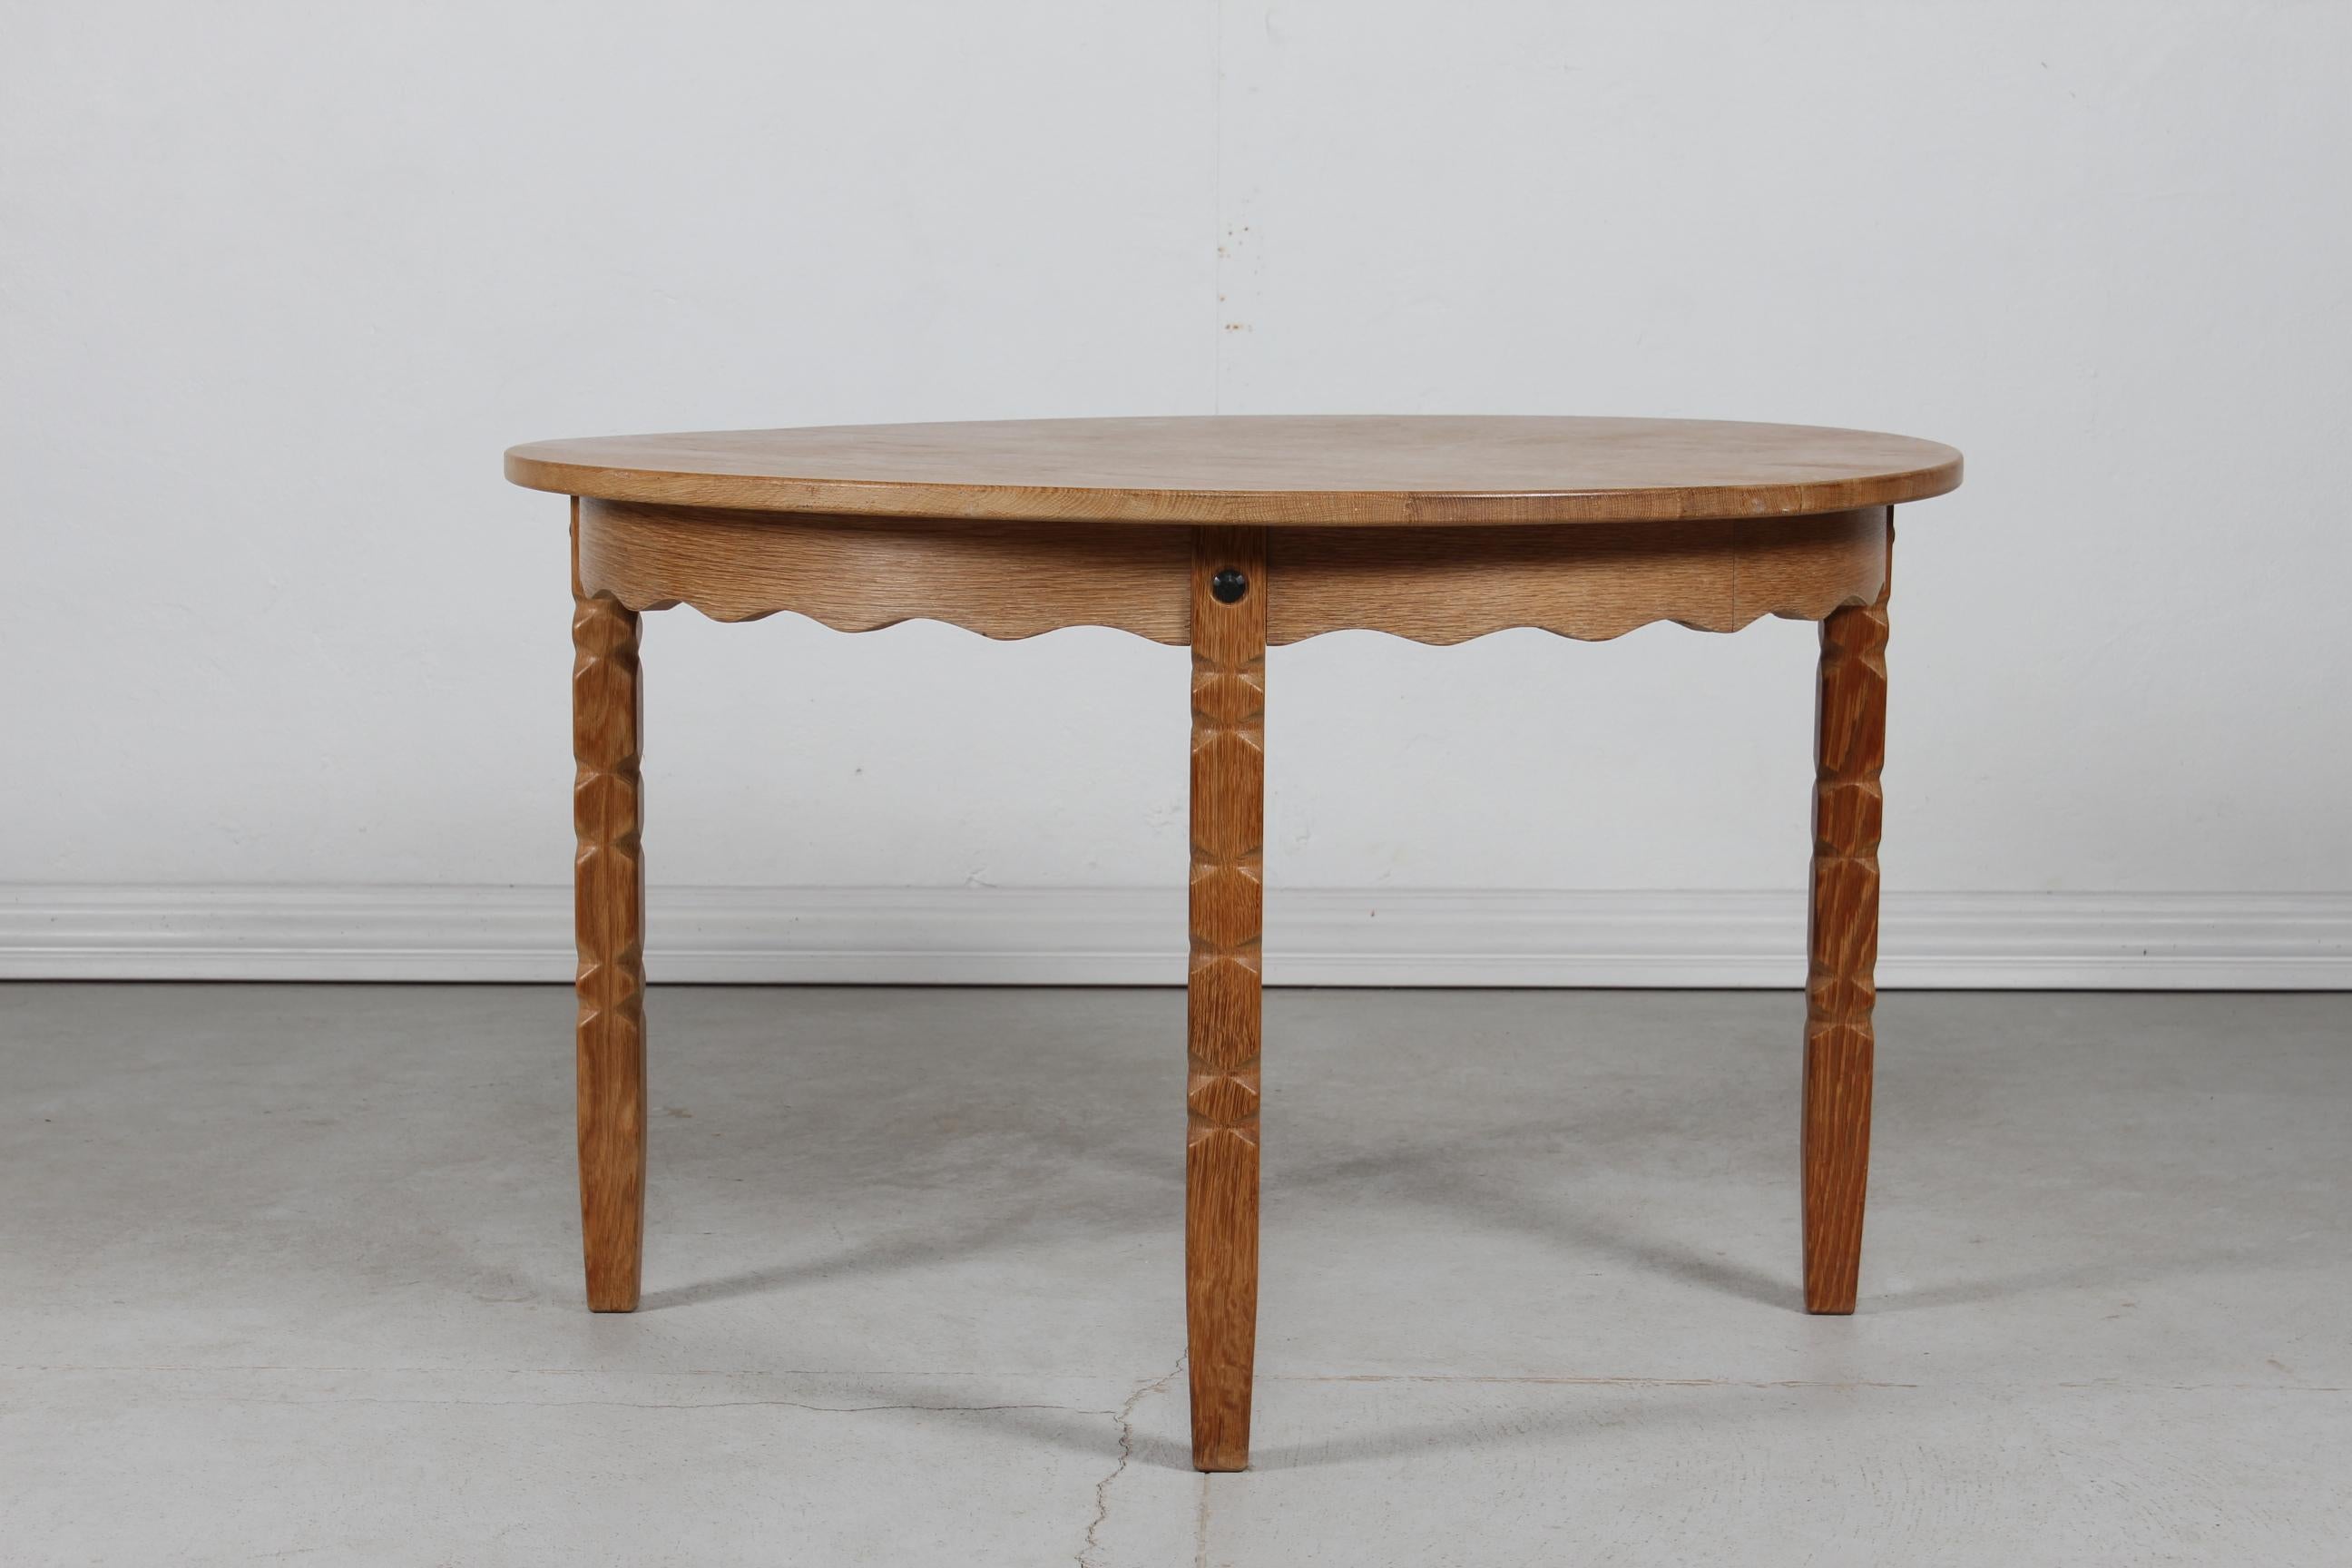 Danish vintage Henning Kjærnulf style round extendable dining table with curved legs.
Manufactured in Denmark in the 1970s.

The table is made of solid oak and oak veneer.
It can be extended with two pull-out-leaves. 

Measures: Diameter 120 cm
Max